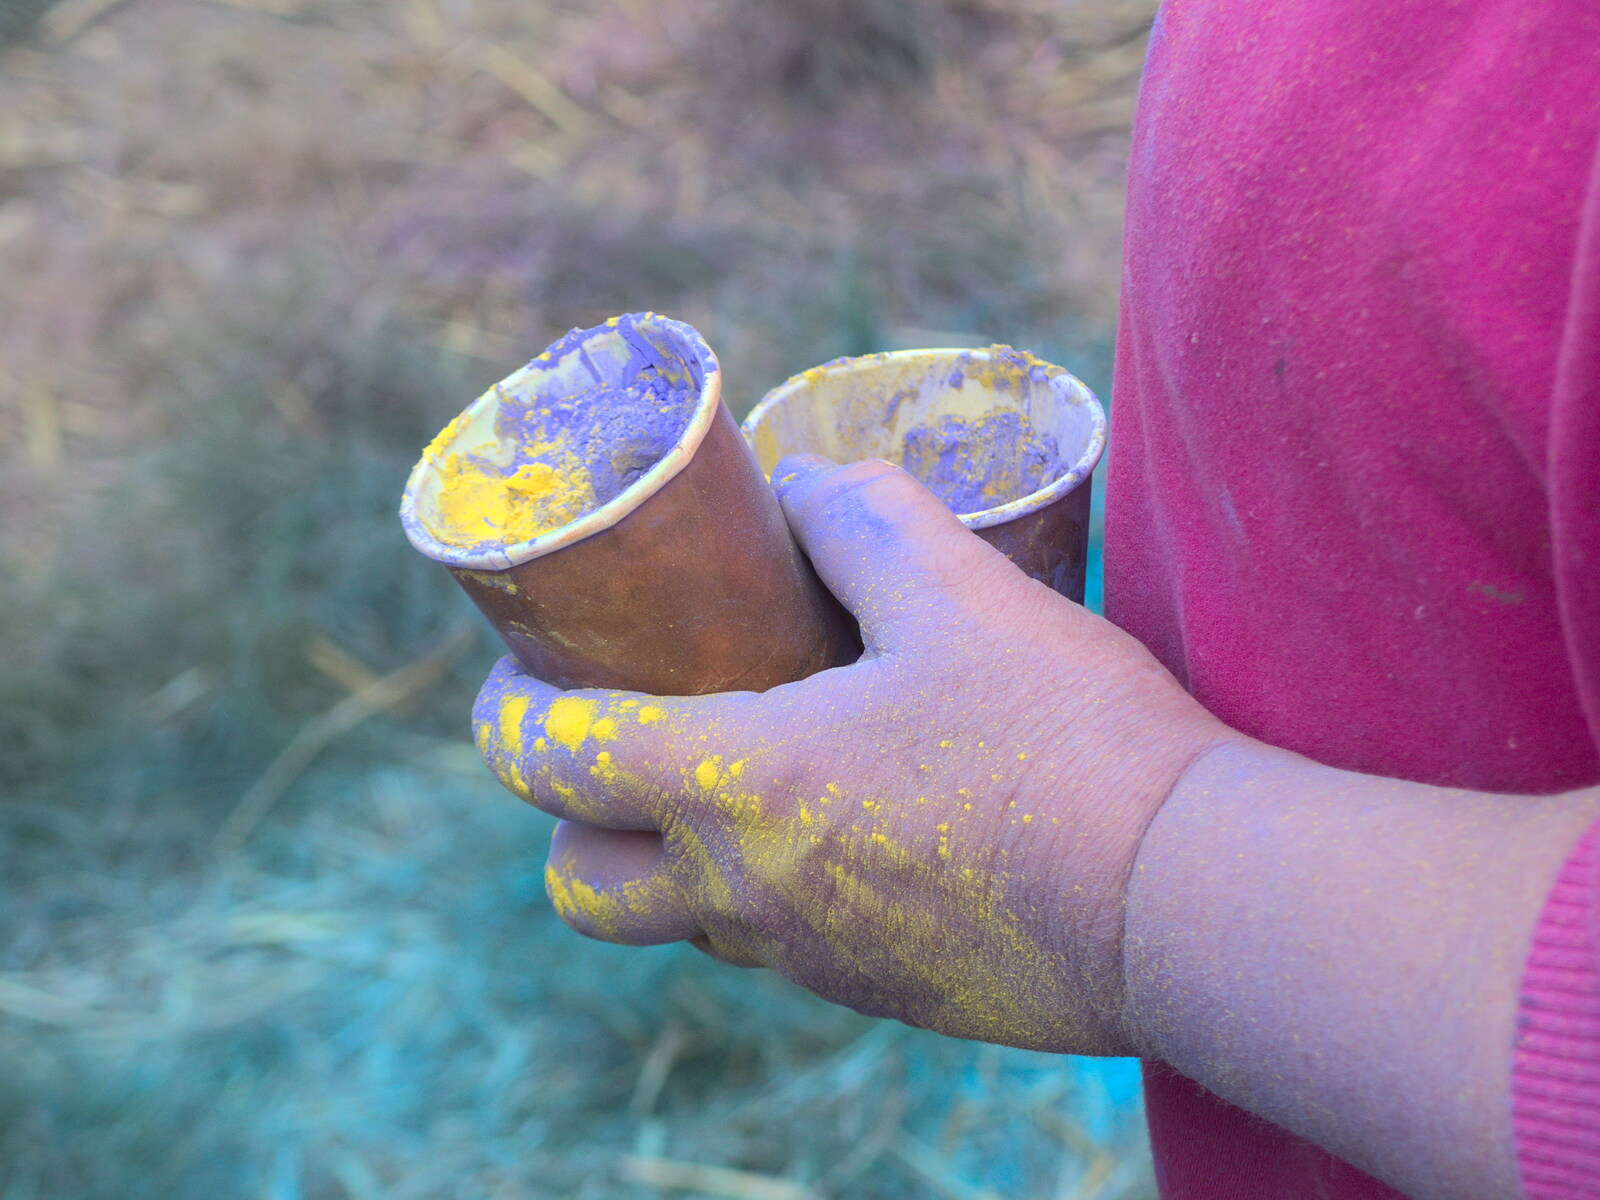 Yellow and purple paint in a pot from Maui Waui Festival, Hill Farm, Gressenhall, Norfolk - 28th August 2021